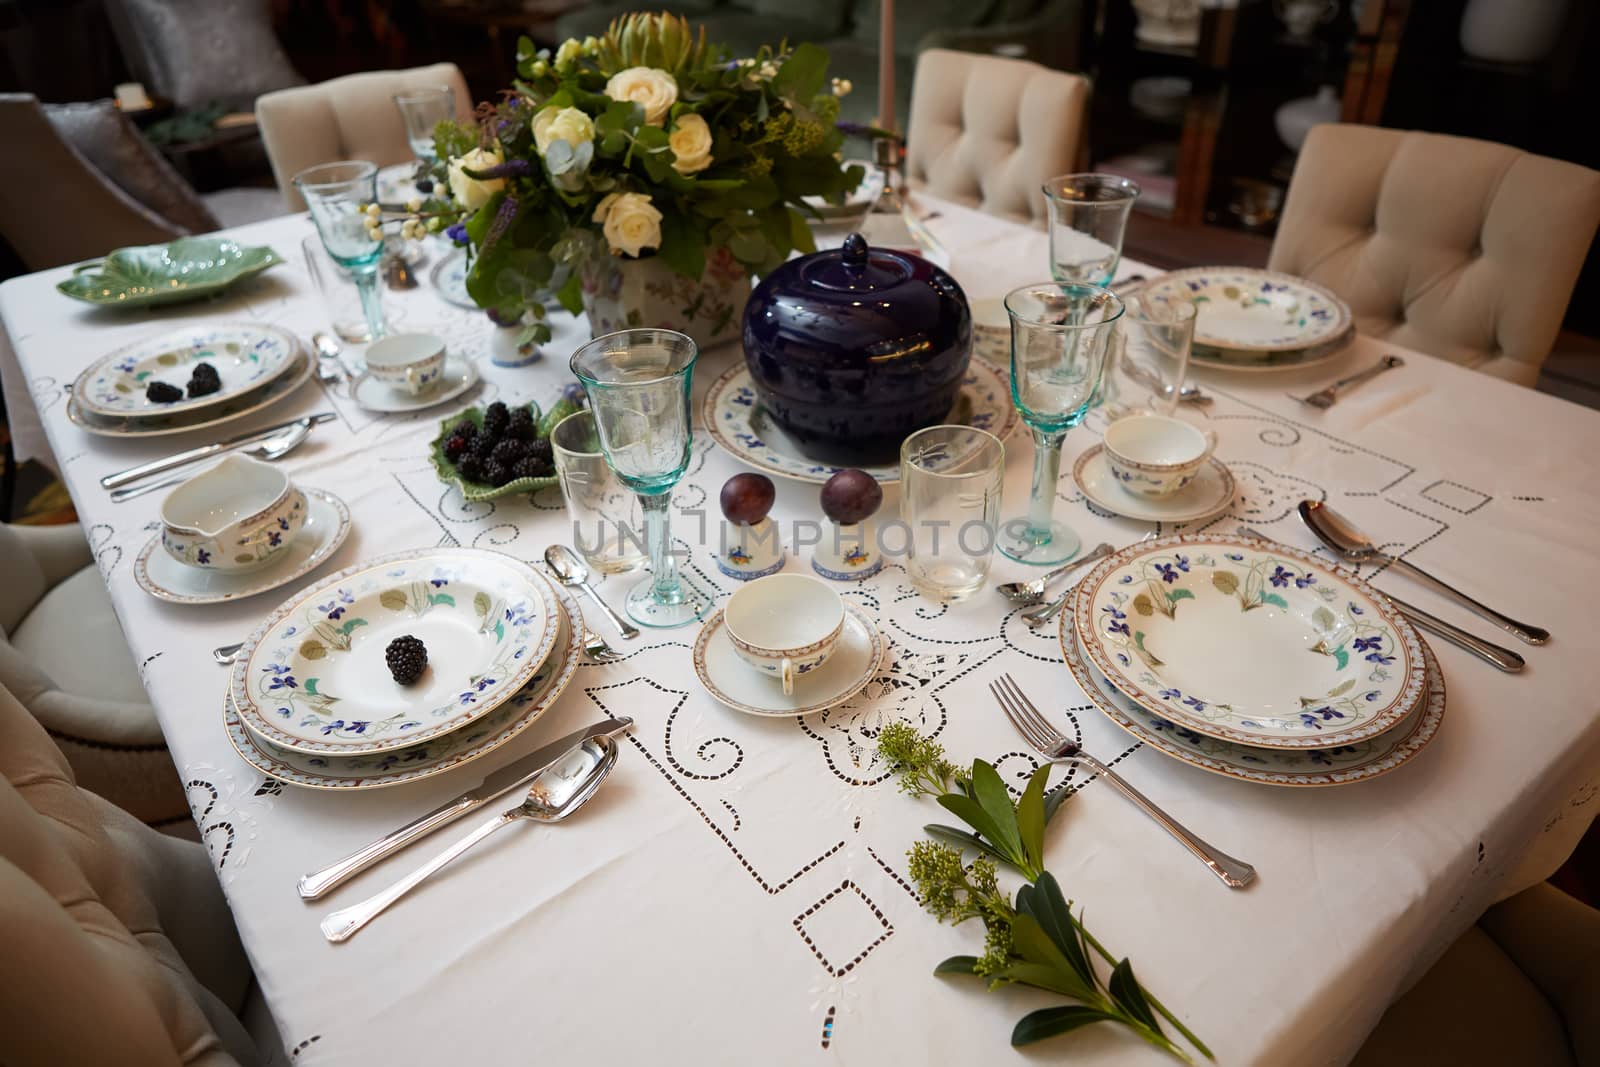 Decorated table ready for dinner. Beautifully decorated table set with flowers, candles, plates and serviettes for wedding or another event in the restaurant.